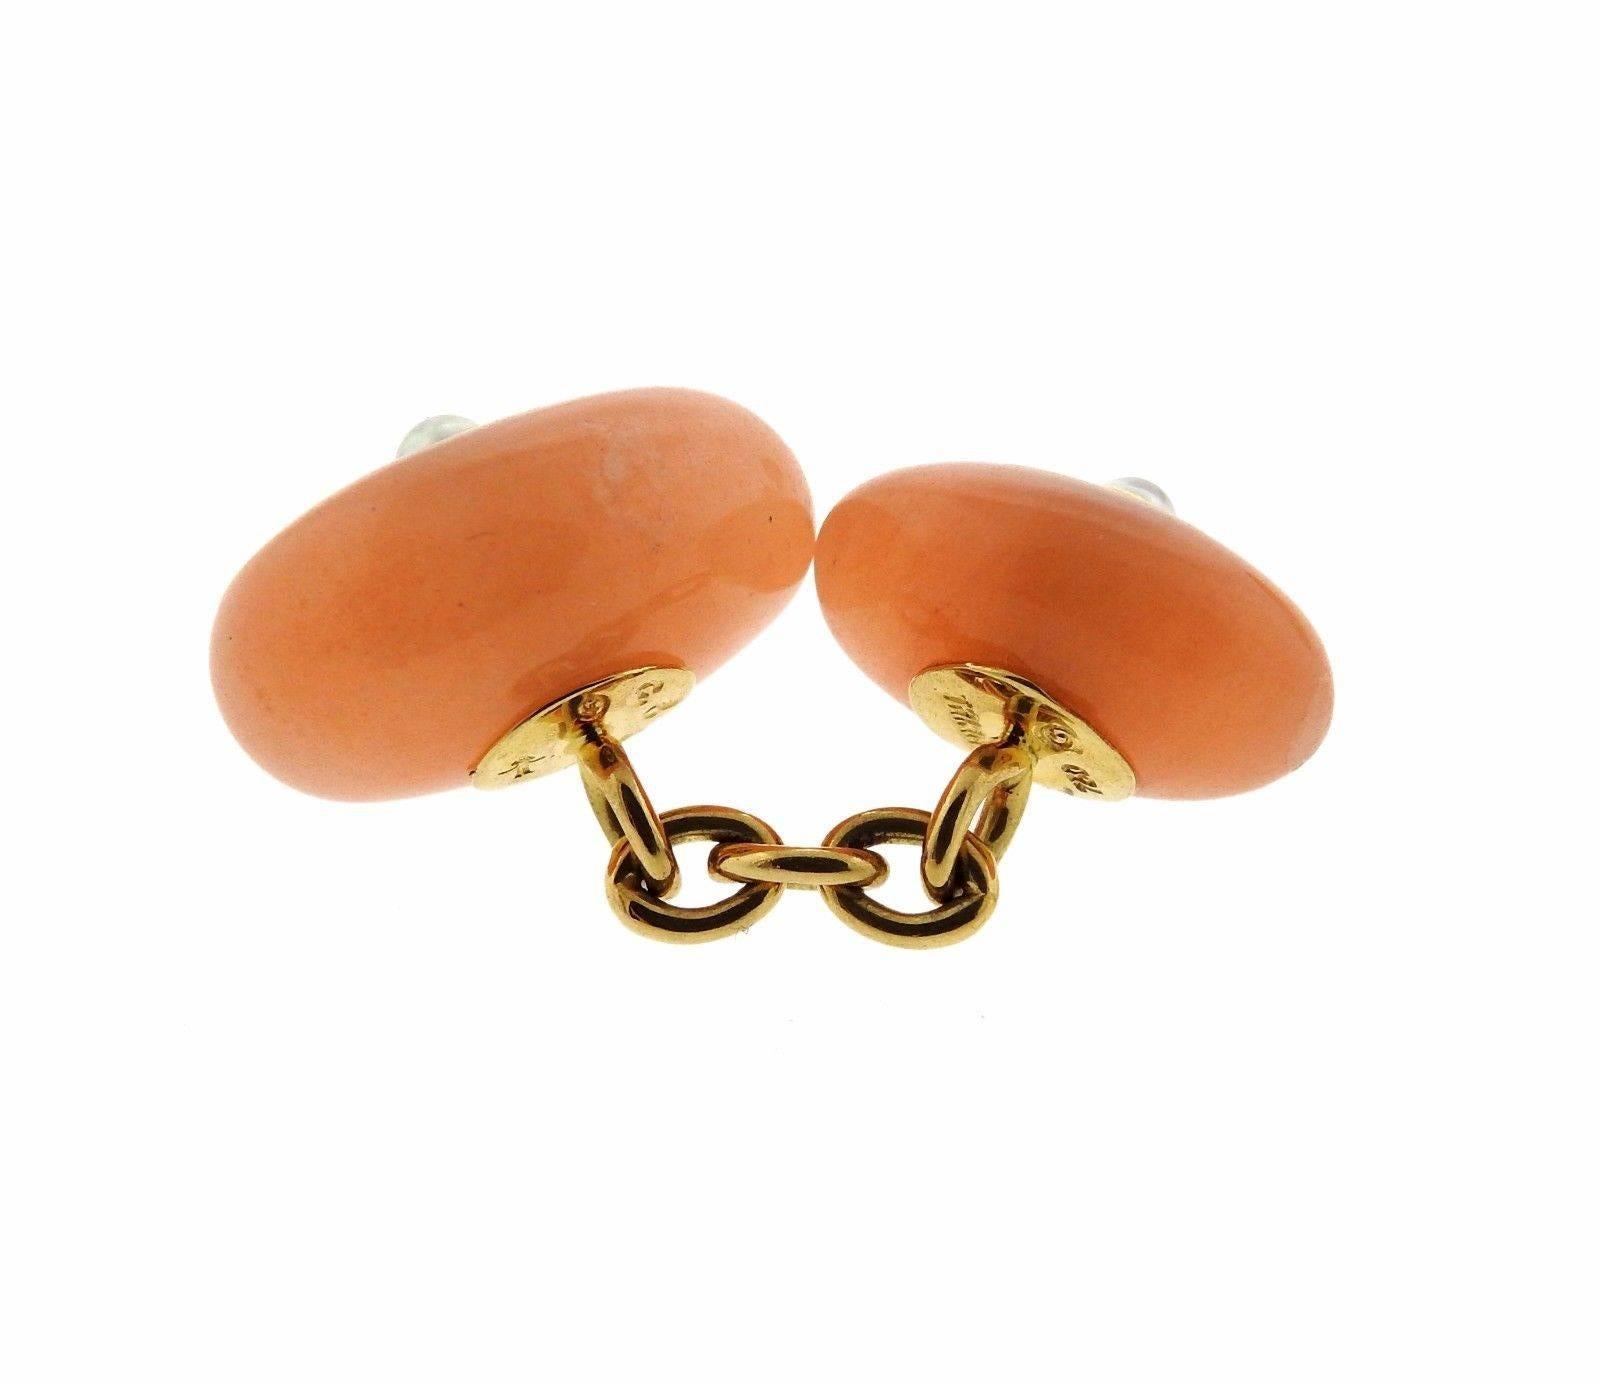 A pair of 18k gold cufflinks set with pinkish peach gemstones and 2.5mm pearls. The cufflink tops are 16mm X 10mm and 14mm X 9mm.  The pair weighs 9.4 grams.  Marked: Trianon,750.